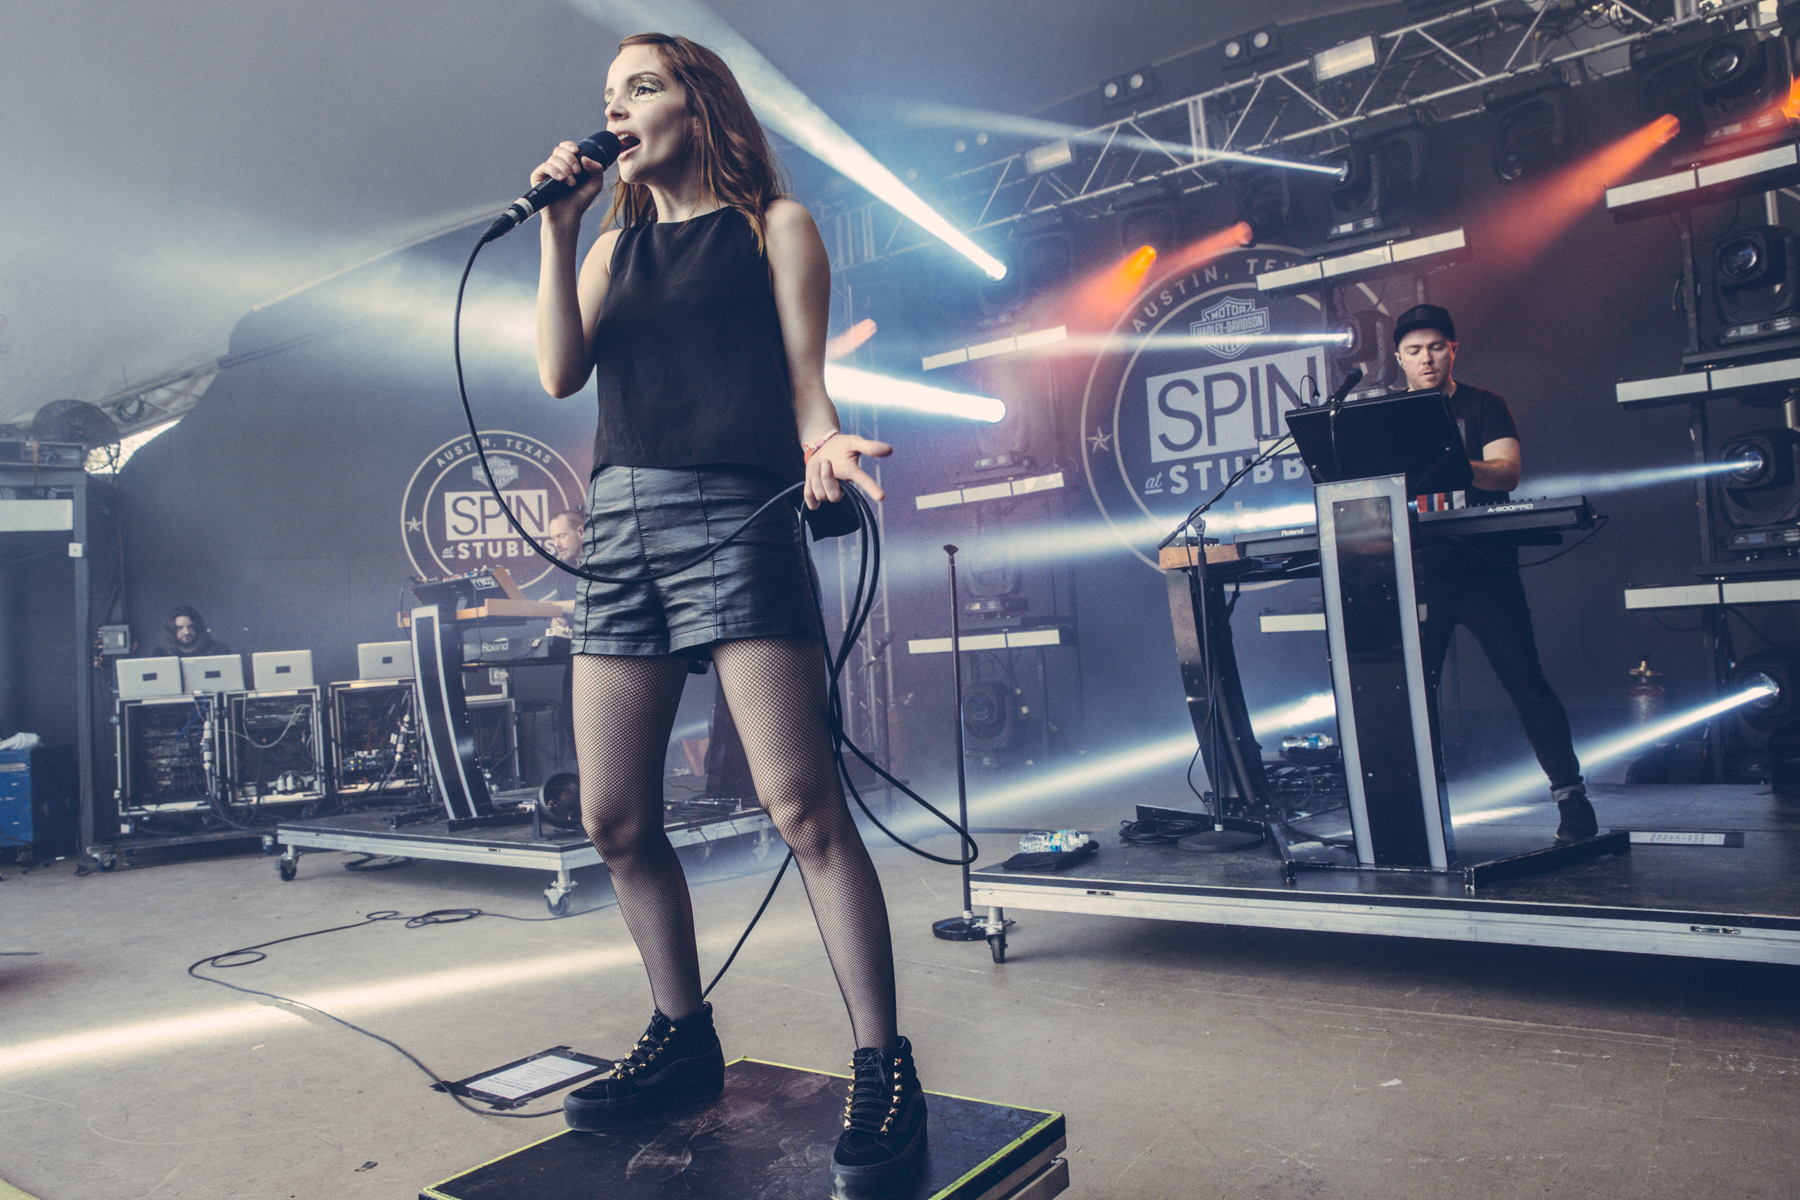 SXSW 2016: CHVRCHES, Vince Staples, Deftones, and More Dominate the Stubb's Stage